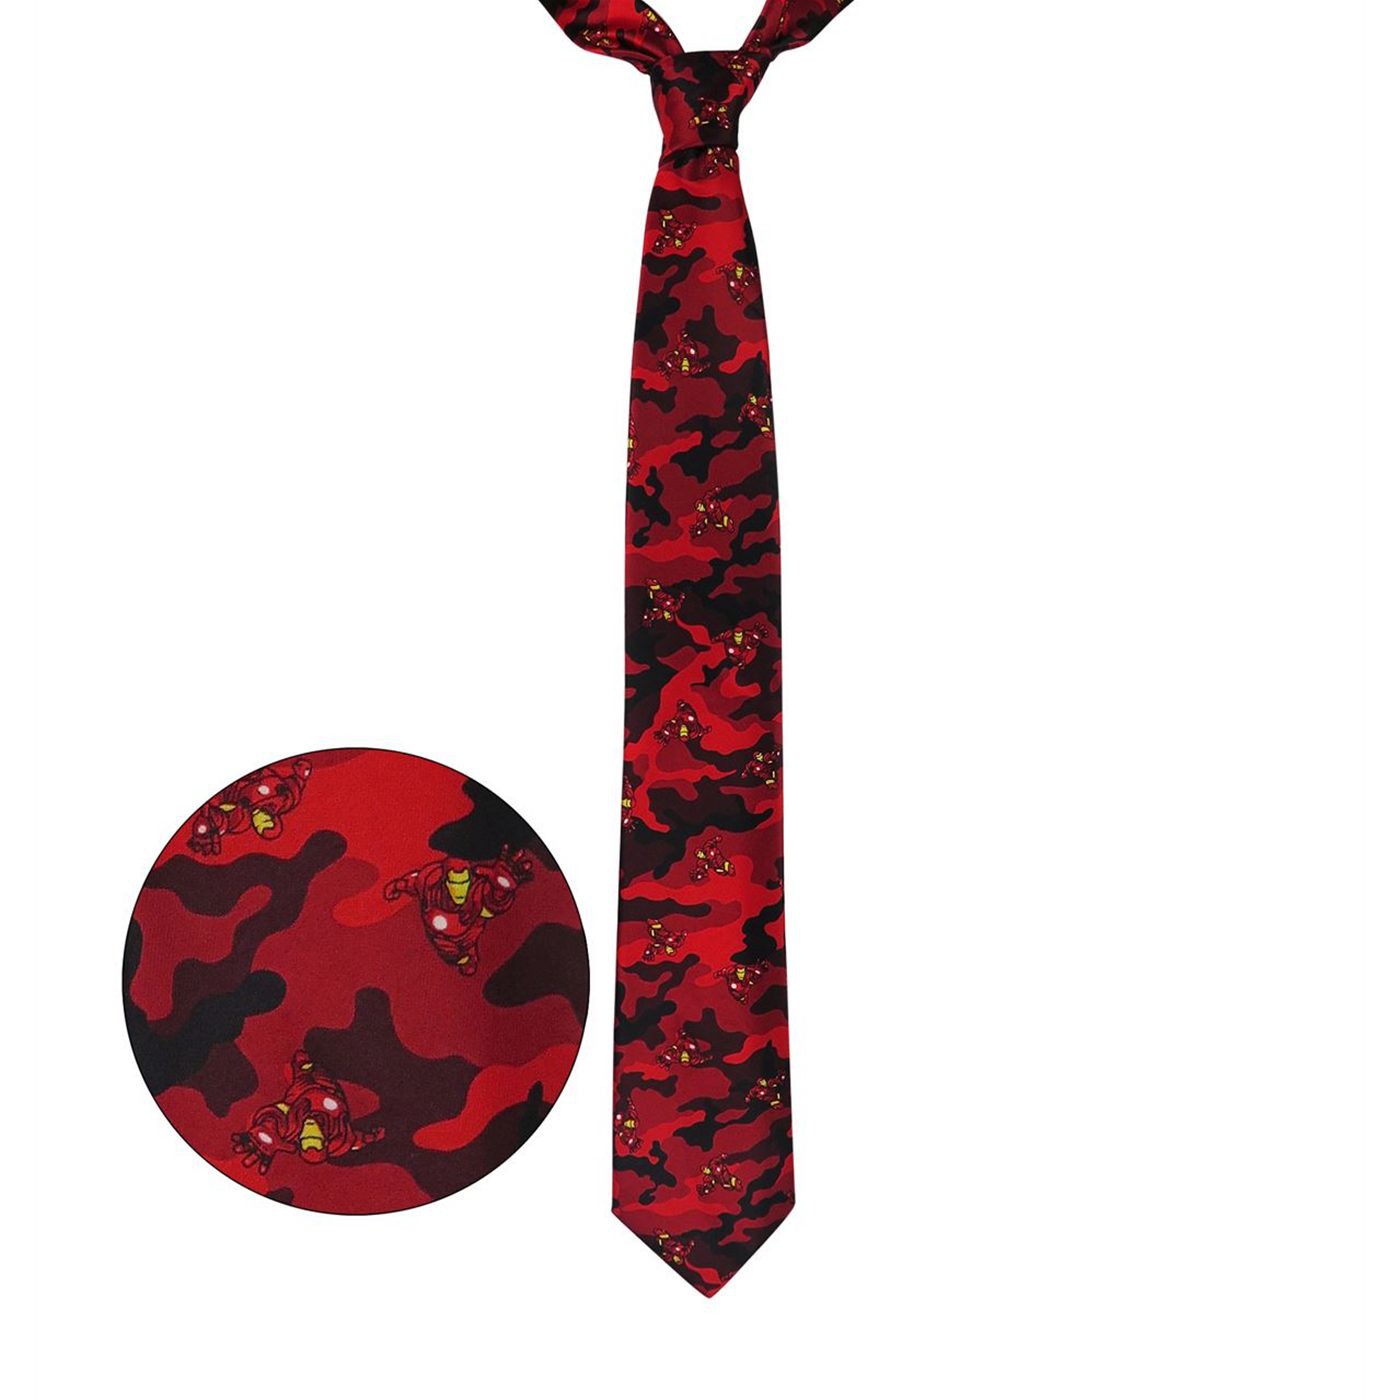 Iron Man Flying Red and Black Camo Tie